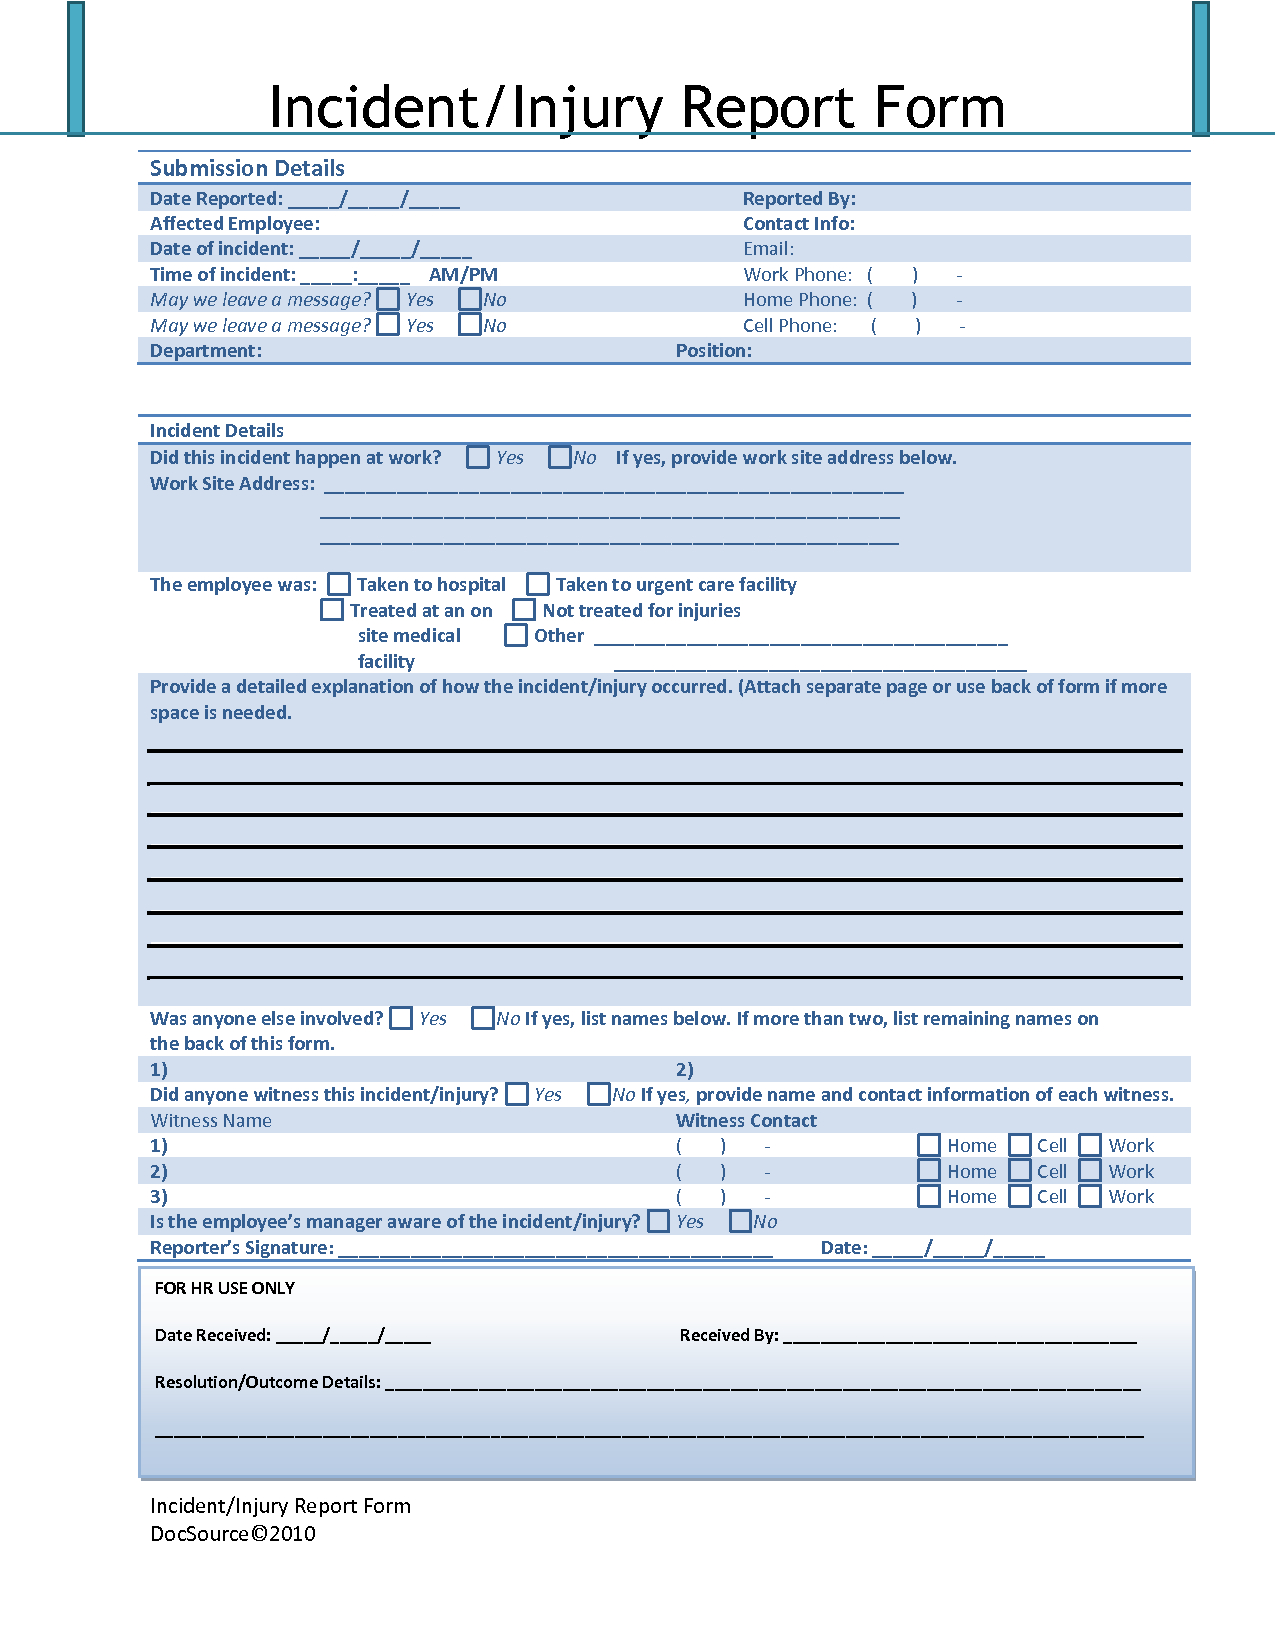 Effective Accident Injury Report Form Template With Blue With Regard To Incident Report Form Template Word